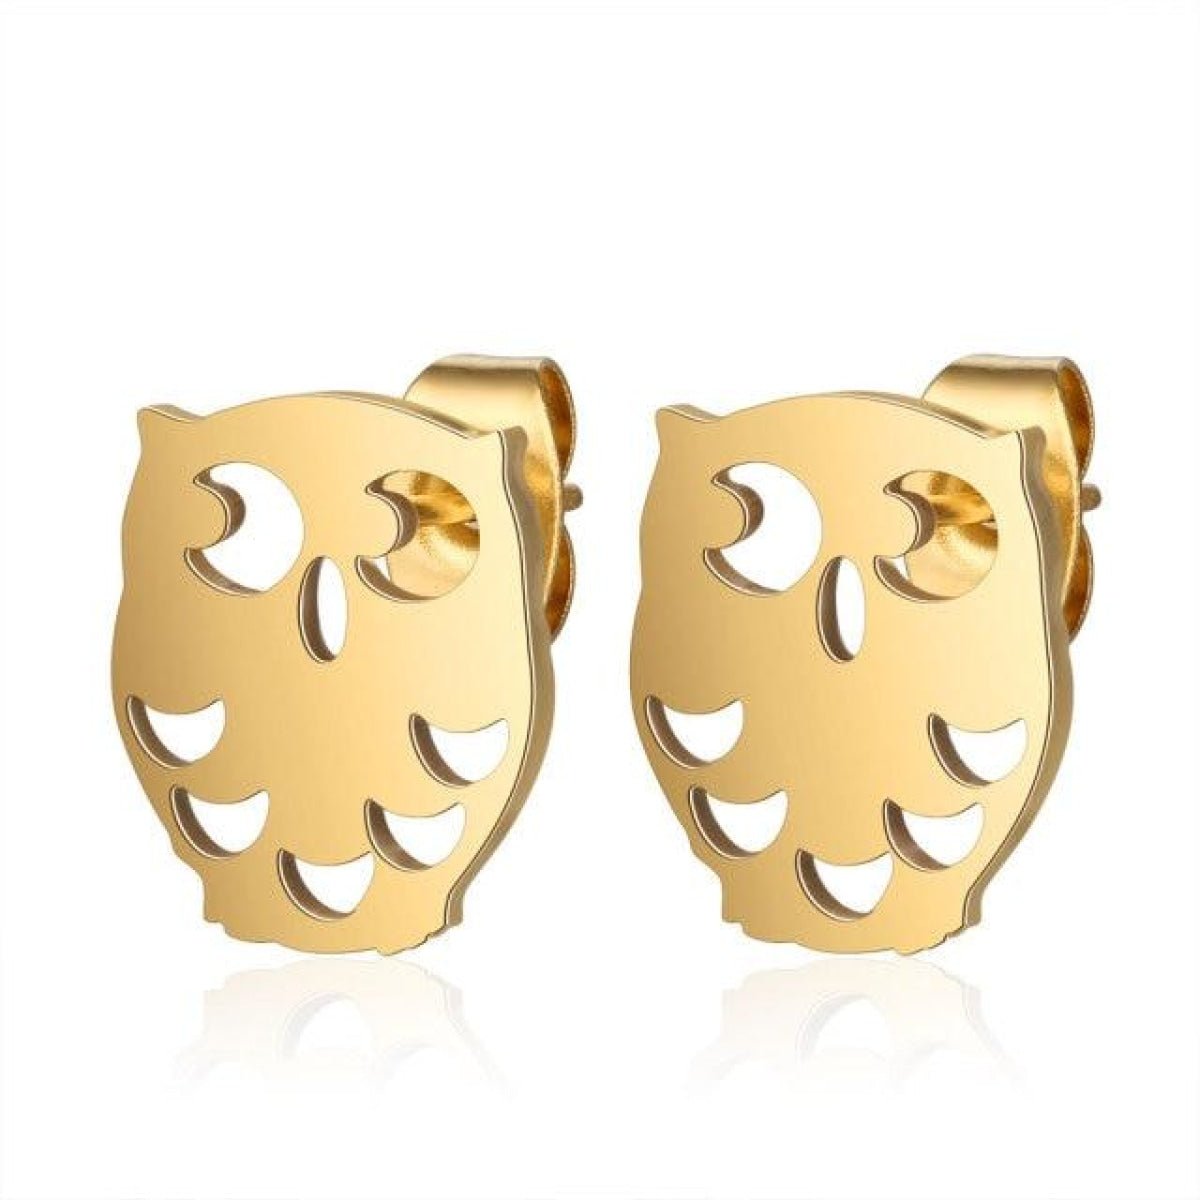 1 Pair 316L Gold Silver Colour Stainless Steel SS Night Owl Humming Bird Swallow Stud Earring Jewellery Gift - Owl Crest - Gold - - Asia Sell